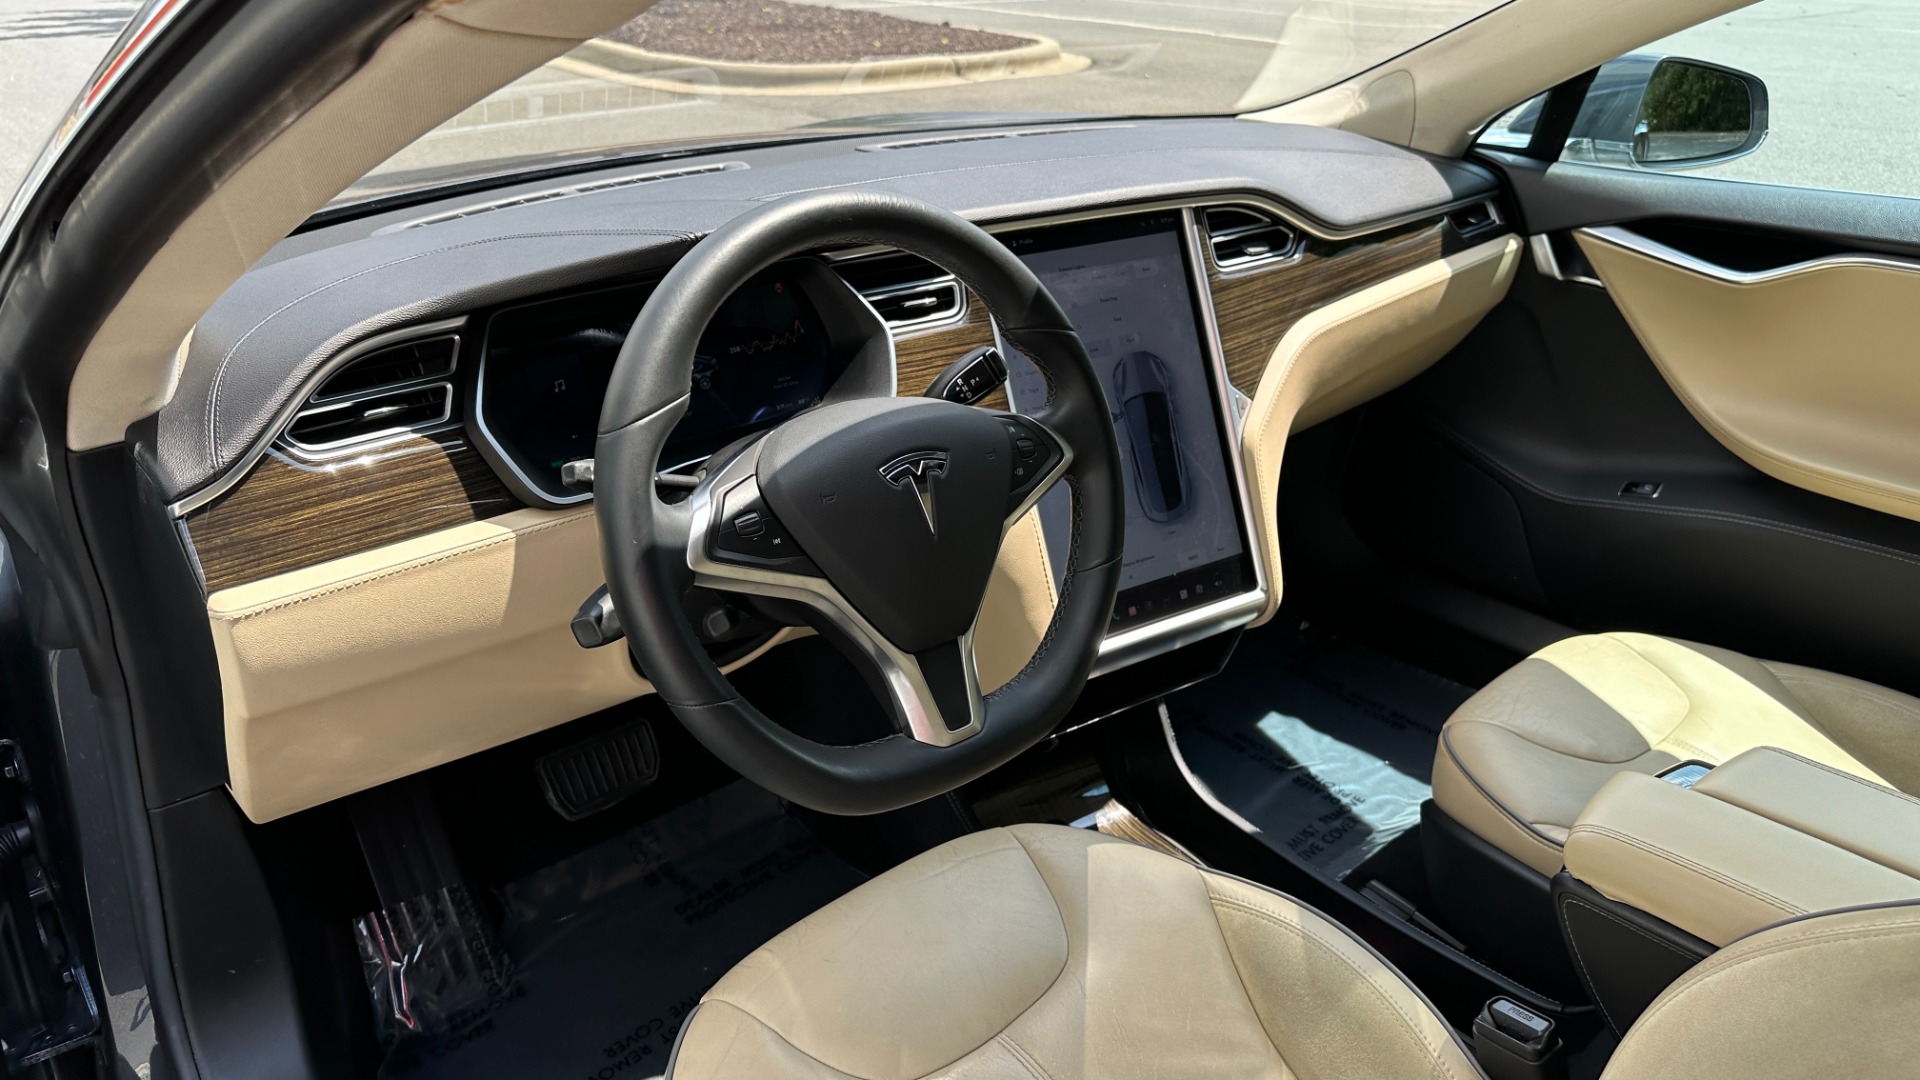 Used 2014 Tesla Model S 60 kWh Battery / 60D / PREMIUM CONNECTIVITY / LEATHER / SUNROOF for sale $22,995 at Formula Imports in Charlotte NC 28227 11